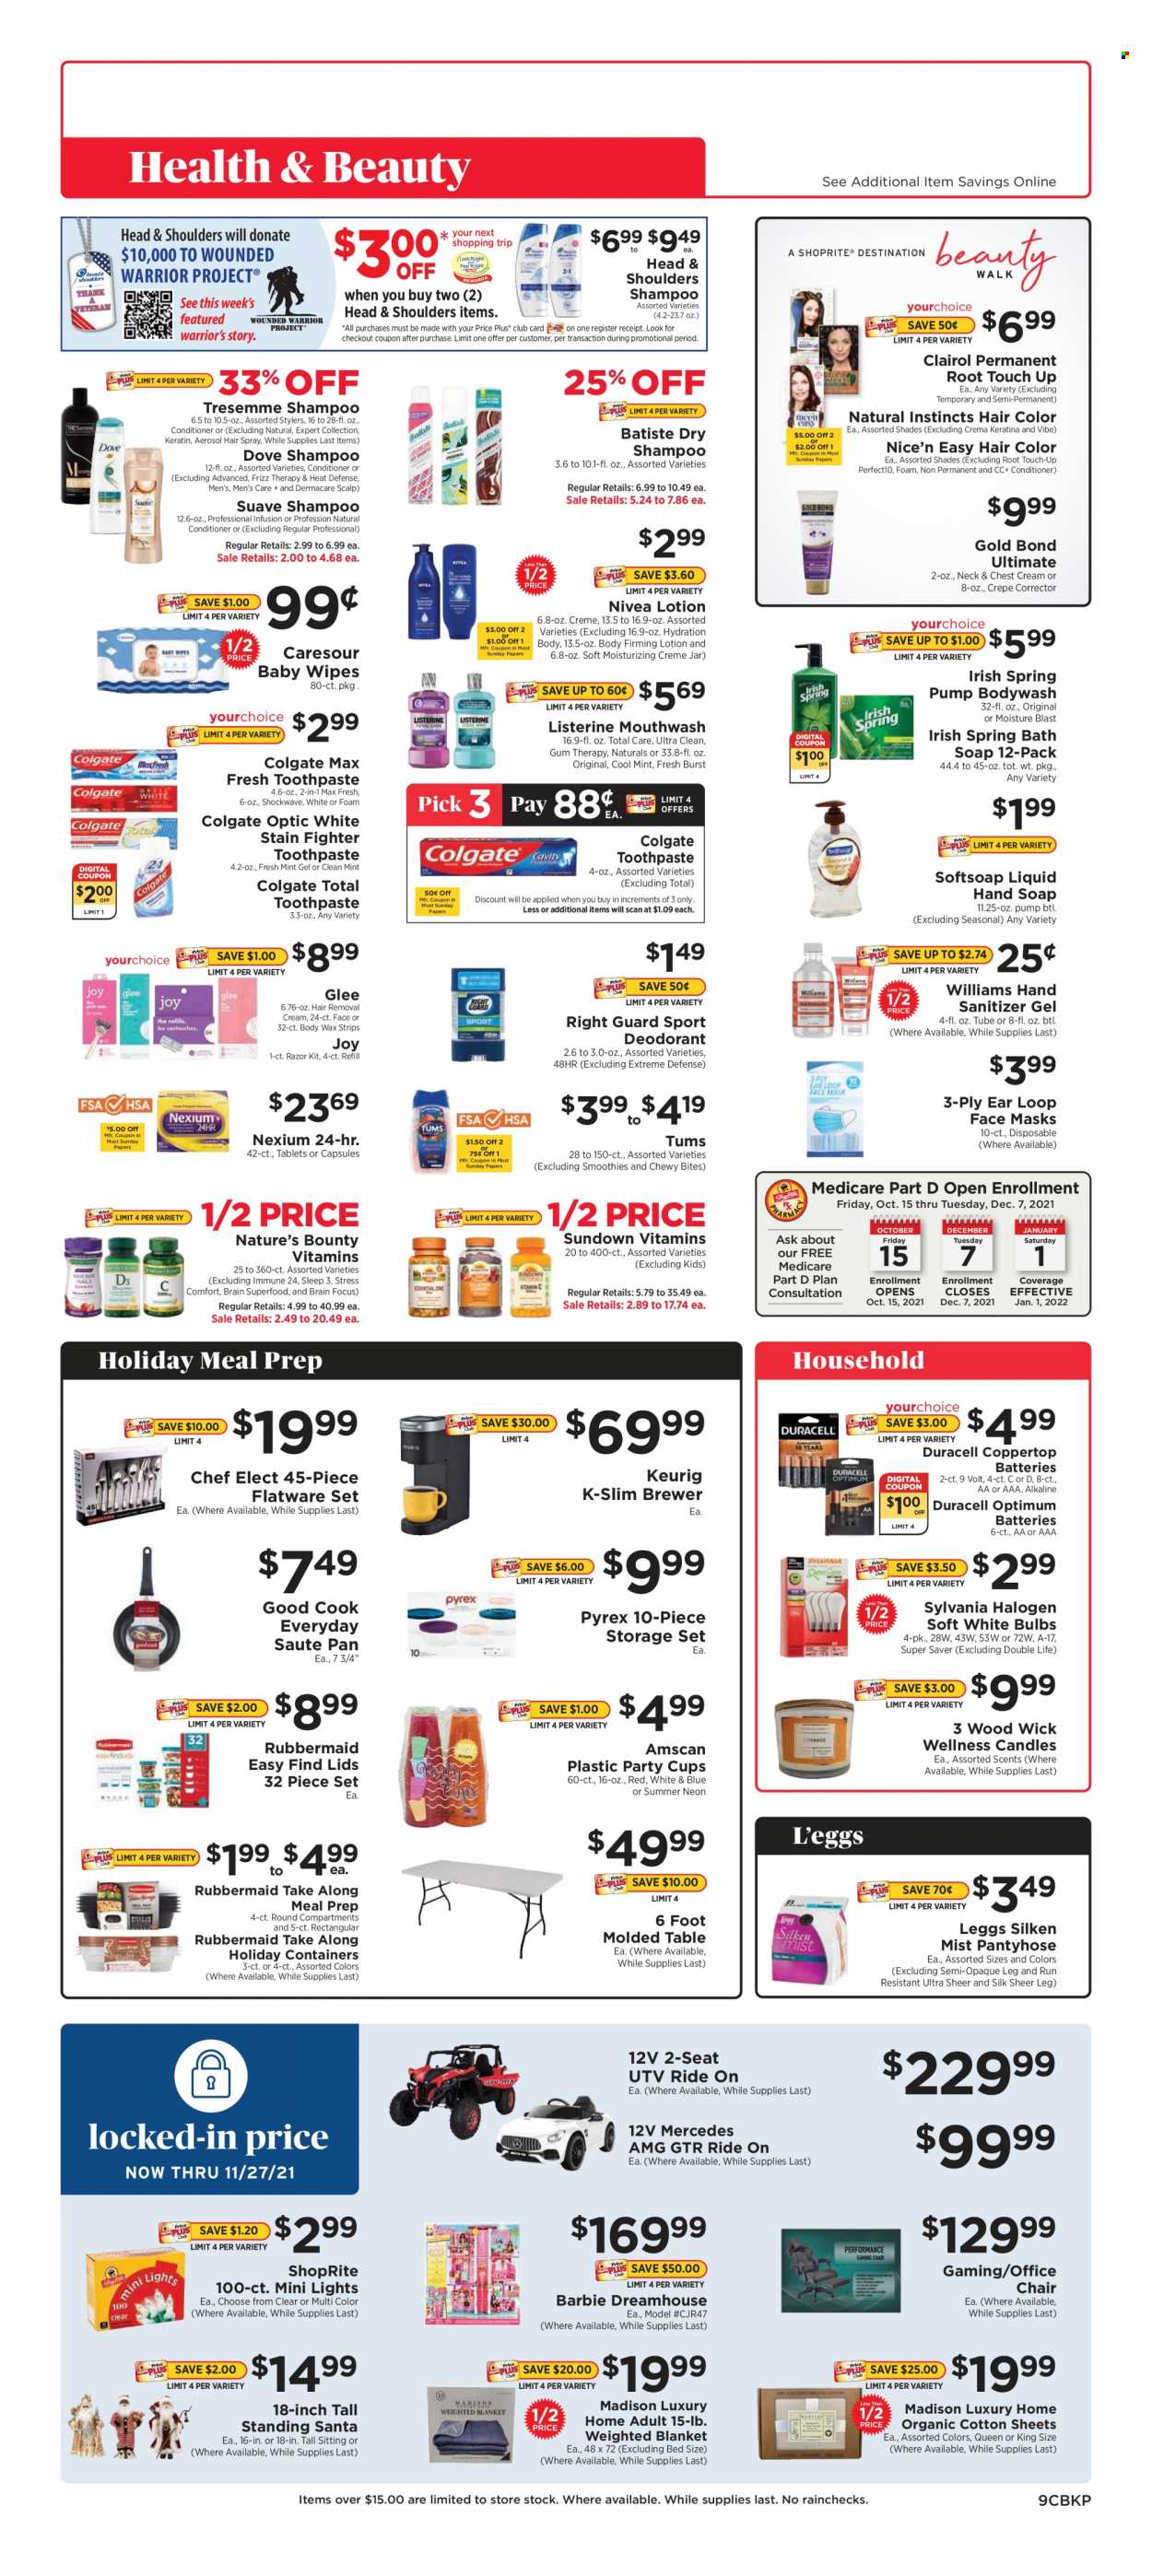 thumbnail - ShopRite Flyer - 11/21/2021 - 11/27/2021 - Sales products - Silk, eggs, Santa, brewer, smoothie, Keurig, wipes, baby wipes, Nivea, Joy, Dove, shampoo, Softsoap, Suave, hand soap, soap, Colgate, Listerine, toothpaste, mouthwash, face mask, Root Touch-Up, Clairol, conditioner, TRESemmé, Head & Shoulders, hair color, keratin, body lotion, anti-perspirant, deodorant, razor, hair removal, wax strips, Barbie, flatware, flatware set, pan, cup, Pyrex, storage container set, jar, candle, party cups, battery, bulb, Duracell, Sylvania, blanket, Optimum, pantyhose, Nature's Bounty, Nexium. Page 9.